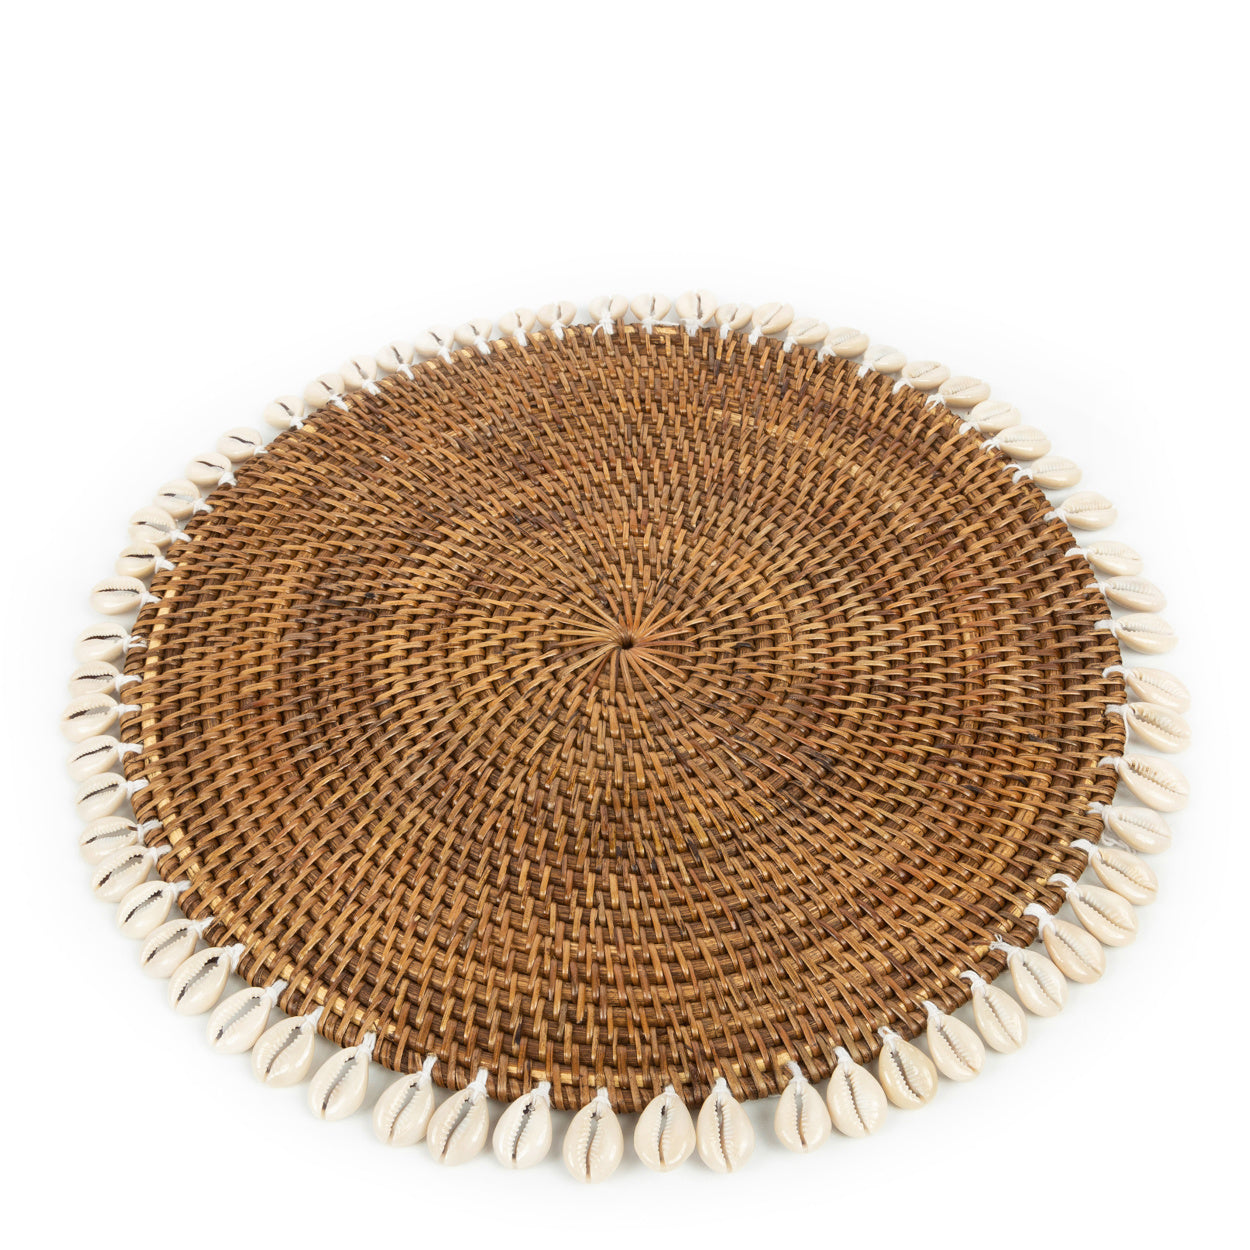 THE COLONIAL Shell Placemat Natural-Brown front view